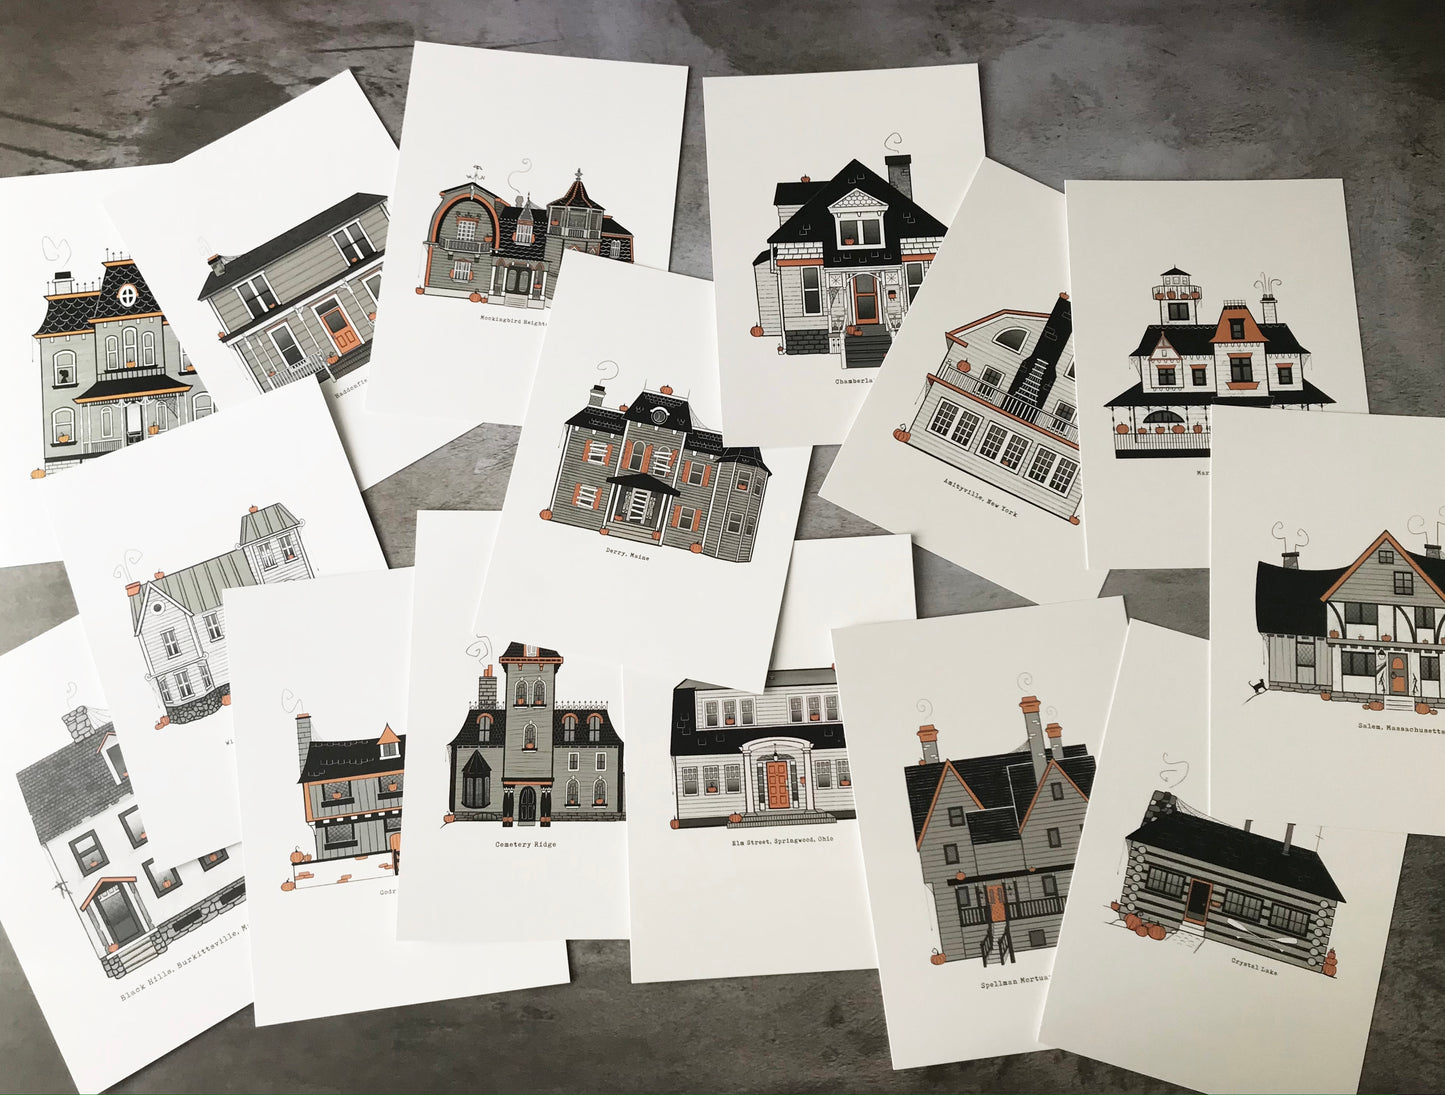 Ominous Houses Art Print-Postcards, horror, witch, film, spooky, haunted, addams family, munsters, sabrina, IT, Friday the 13th